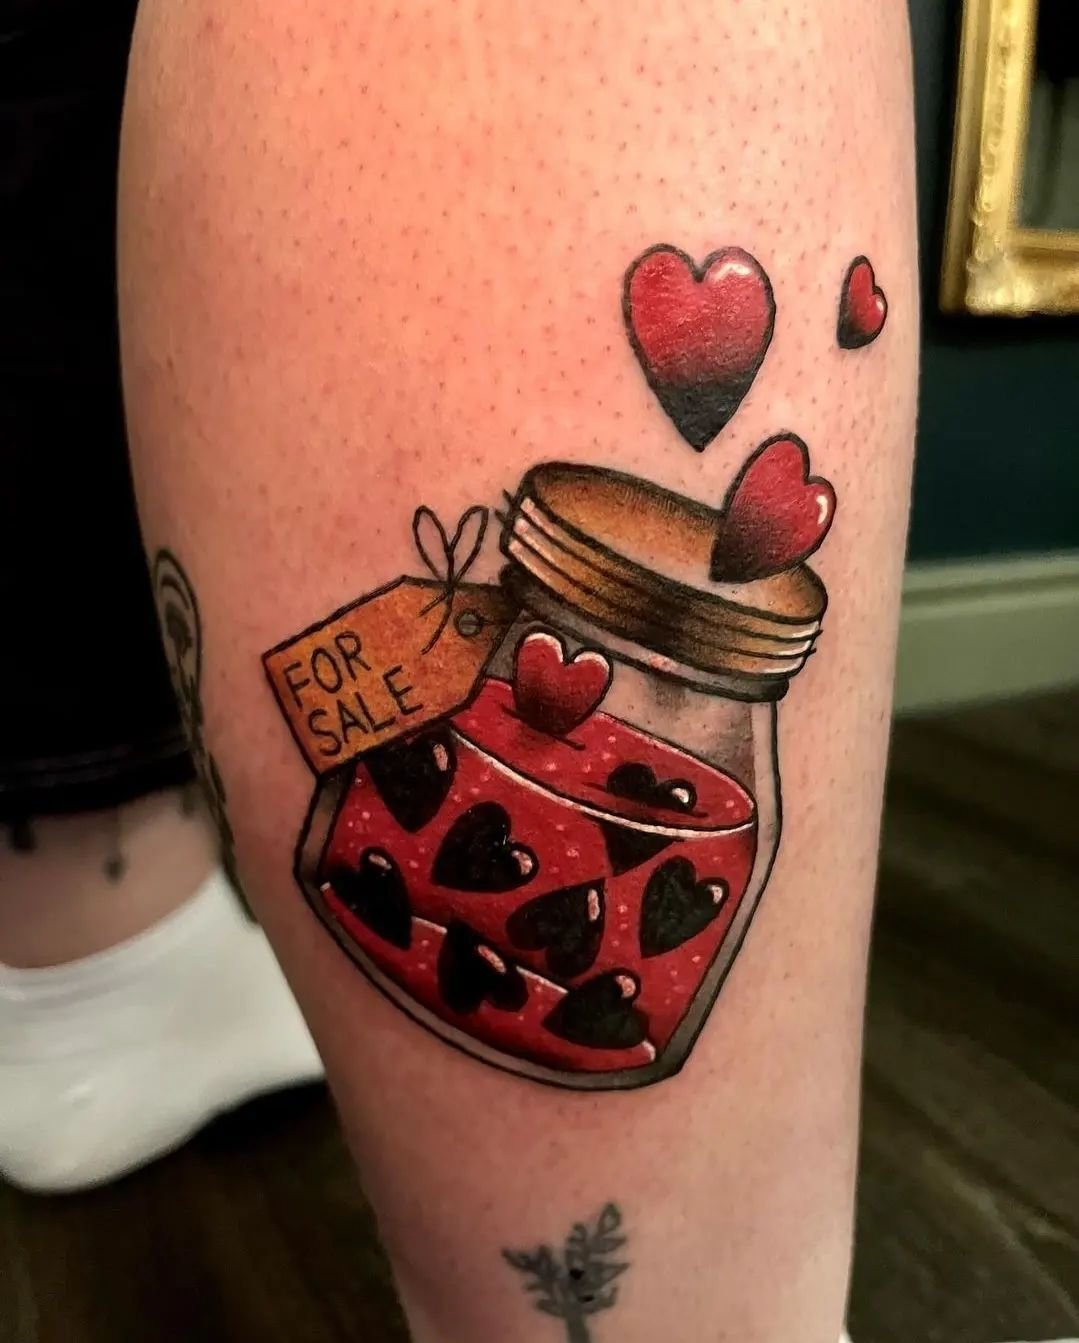 Heart for sale. Traditional jar of hearts by @howlthetattooer 
.
.
.
.
.
#tattoo #tattoos #tattooed #inked #ink #tradworkerssubmission #traditionaltattoo #tradworkers #tradtattoos #colourtattoo #colortattoo #traditionaltattoos #neotraditionaltattoo #